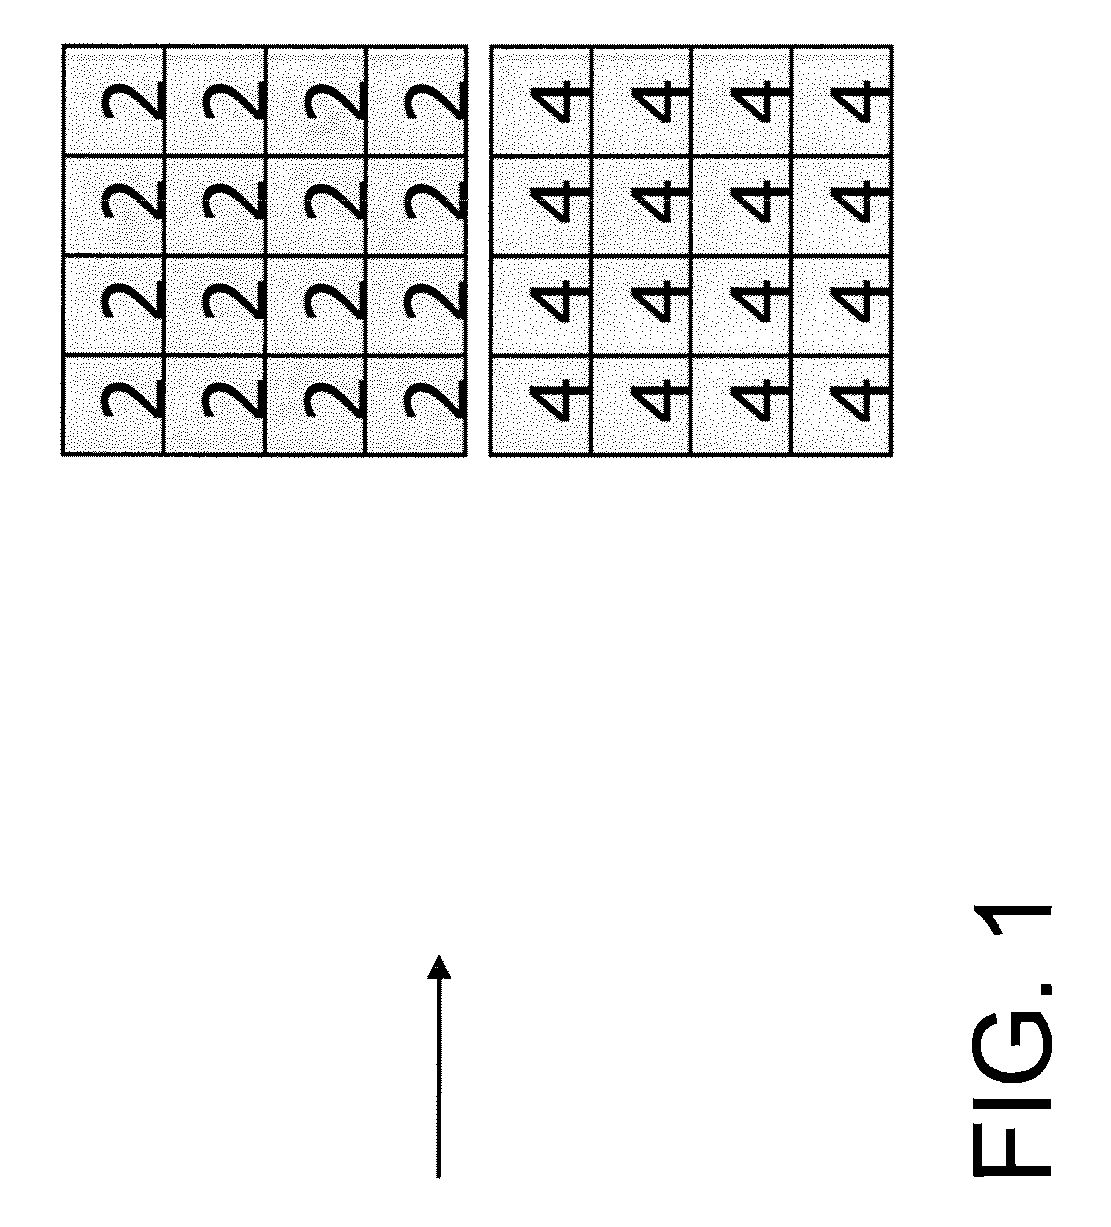 End-of-block markers spanning multiple blocks for use in video coding